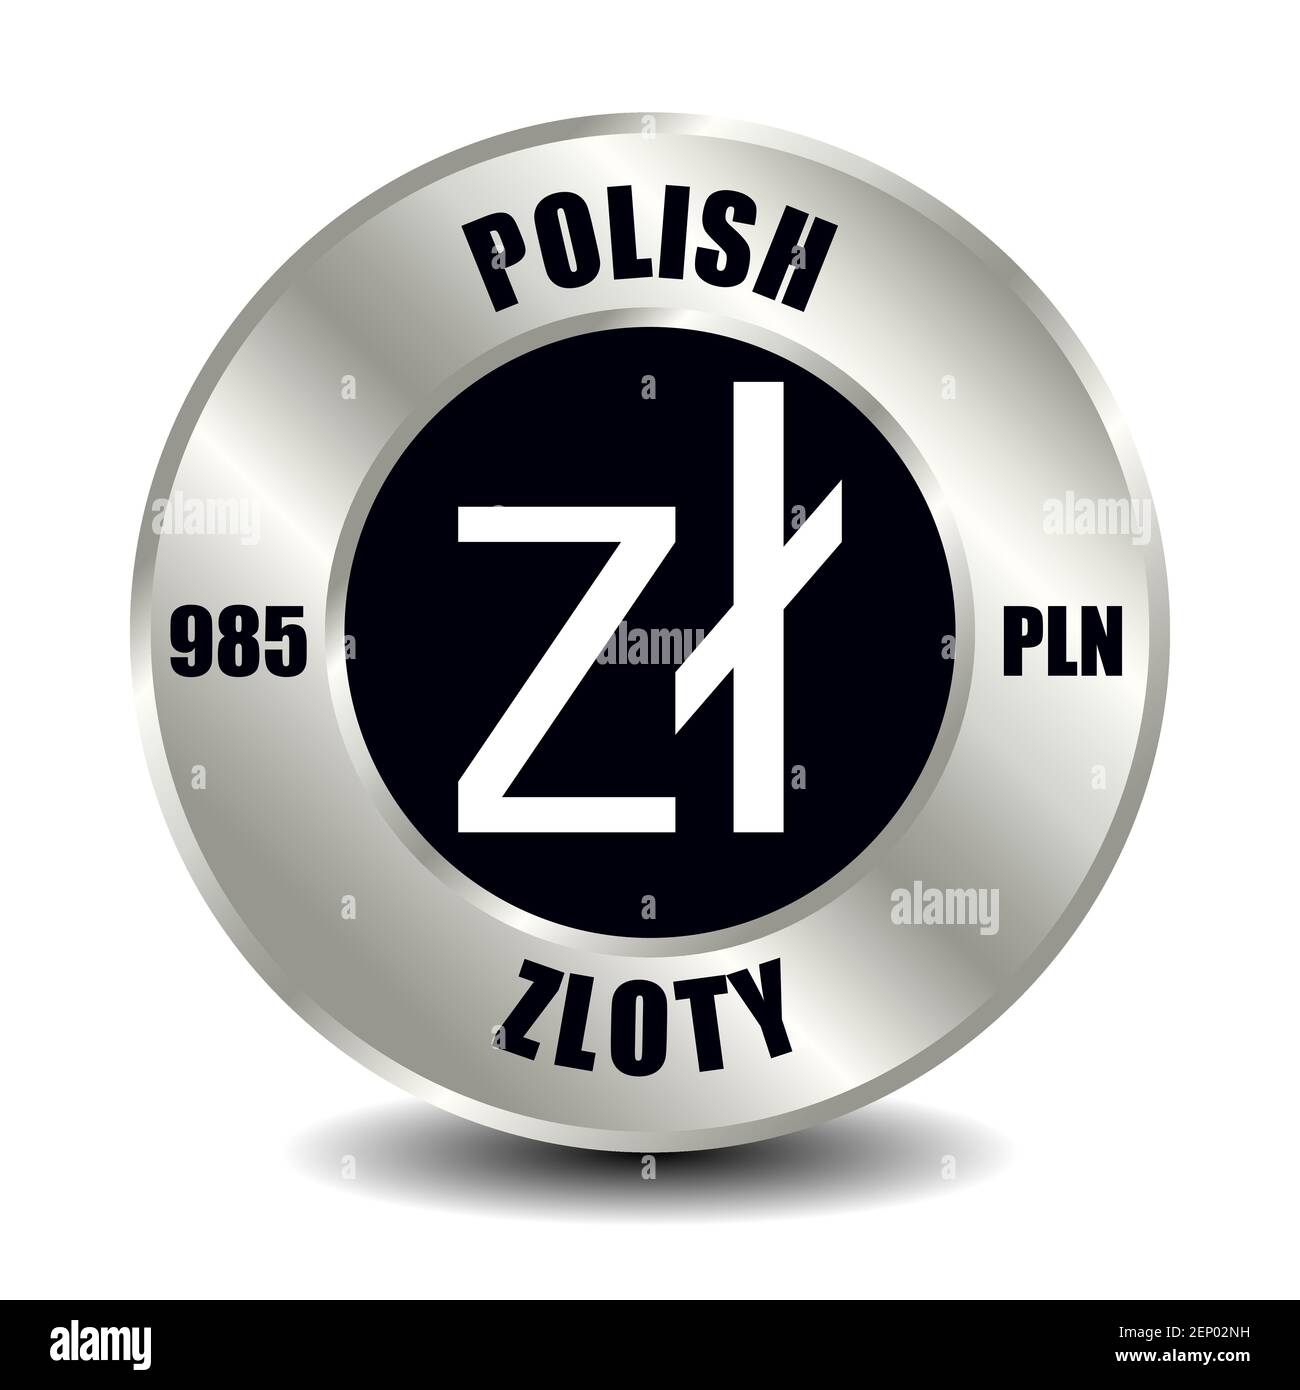 Poland money icon isolated on round silver coin. Vector sign of currency symbol with international ISO code and abbreviation Stock Vector